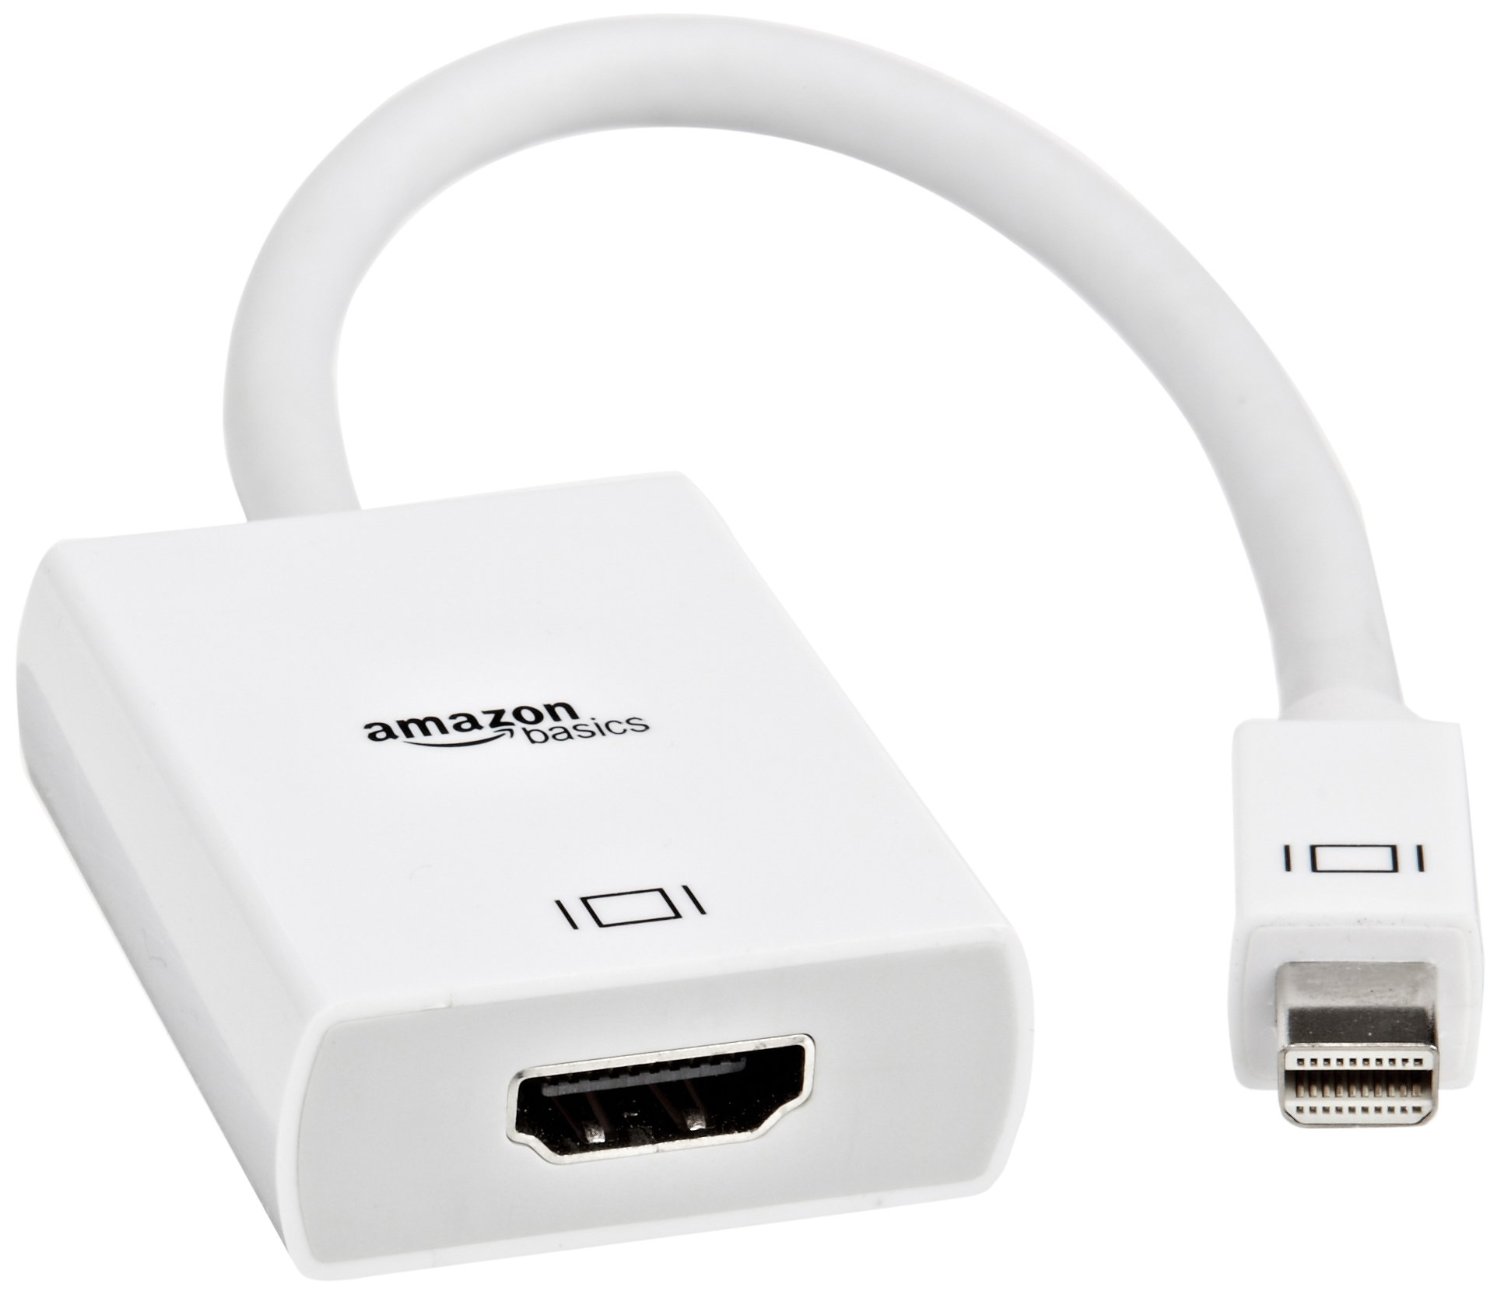 macbook pro thunderbolt to hdmi adapter not working